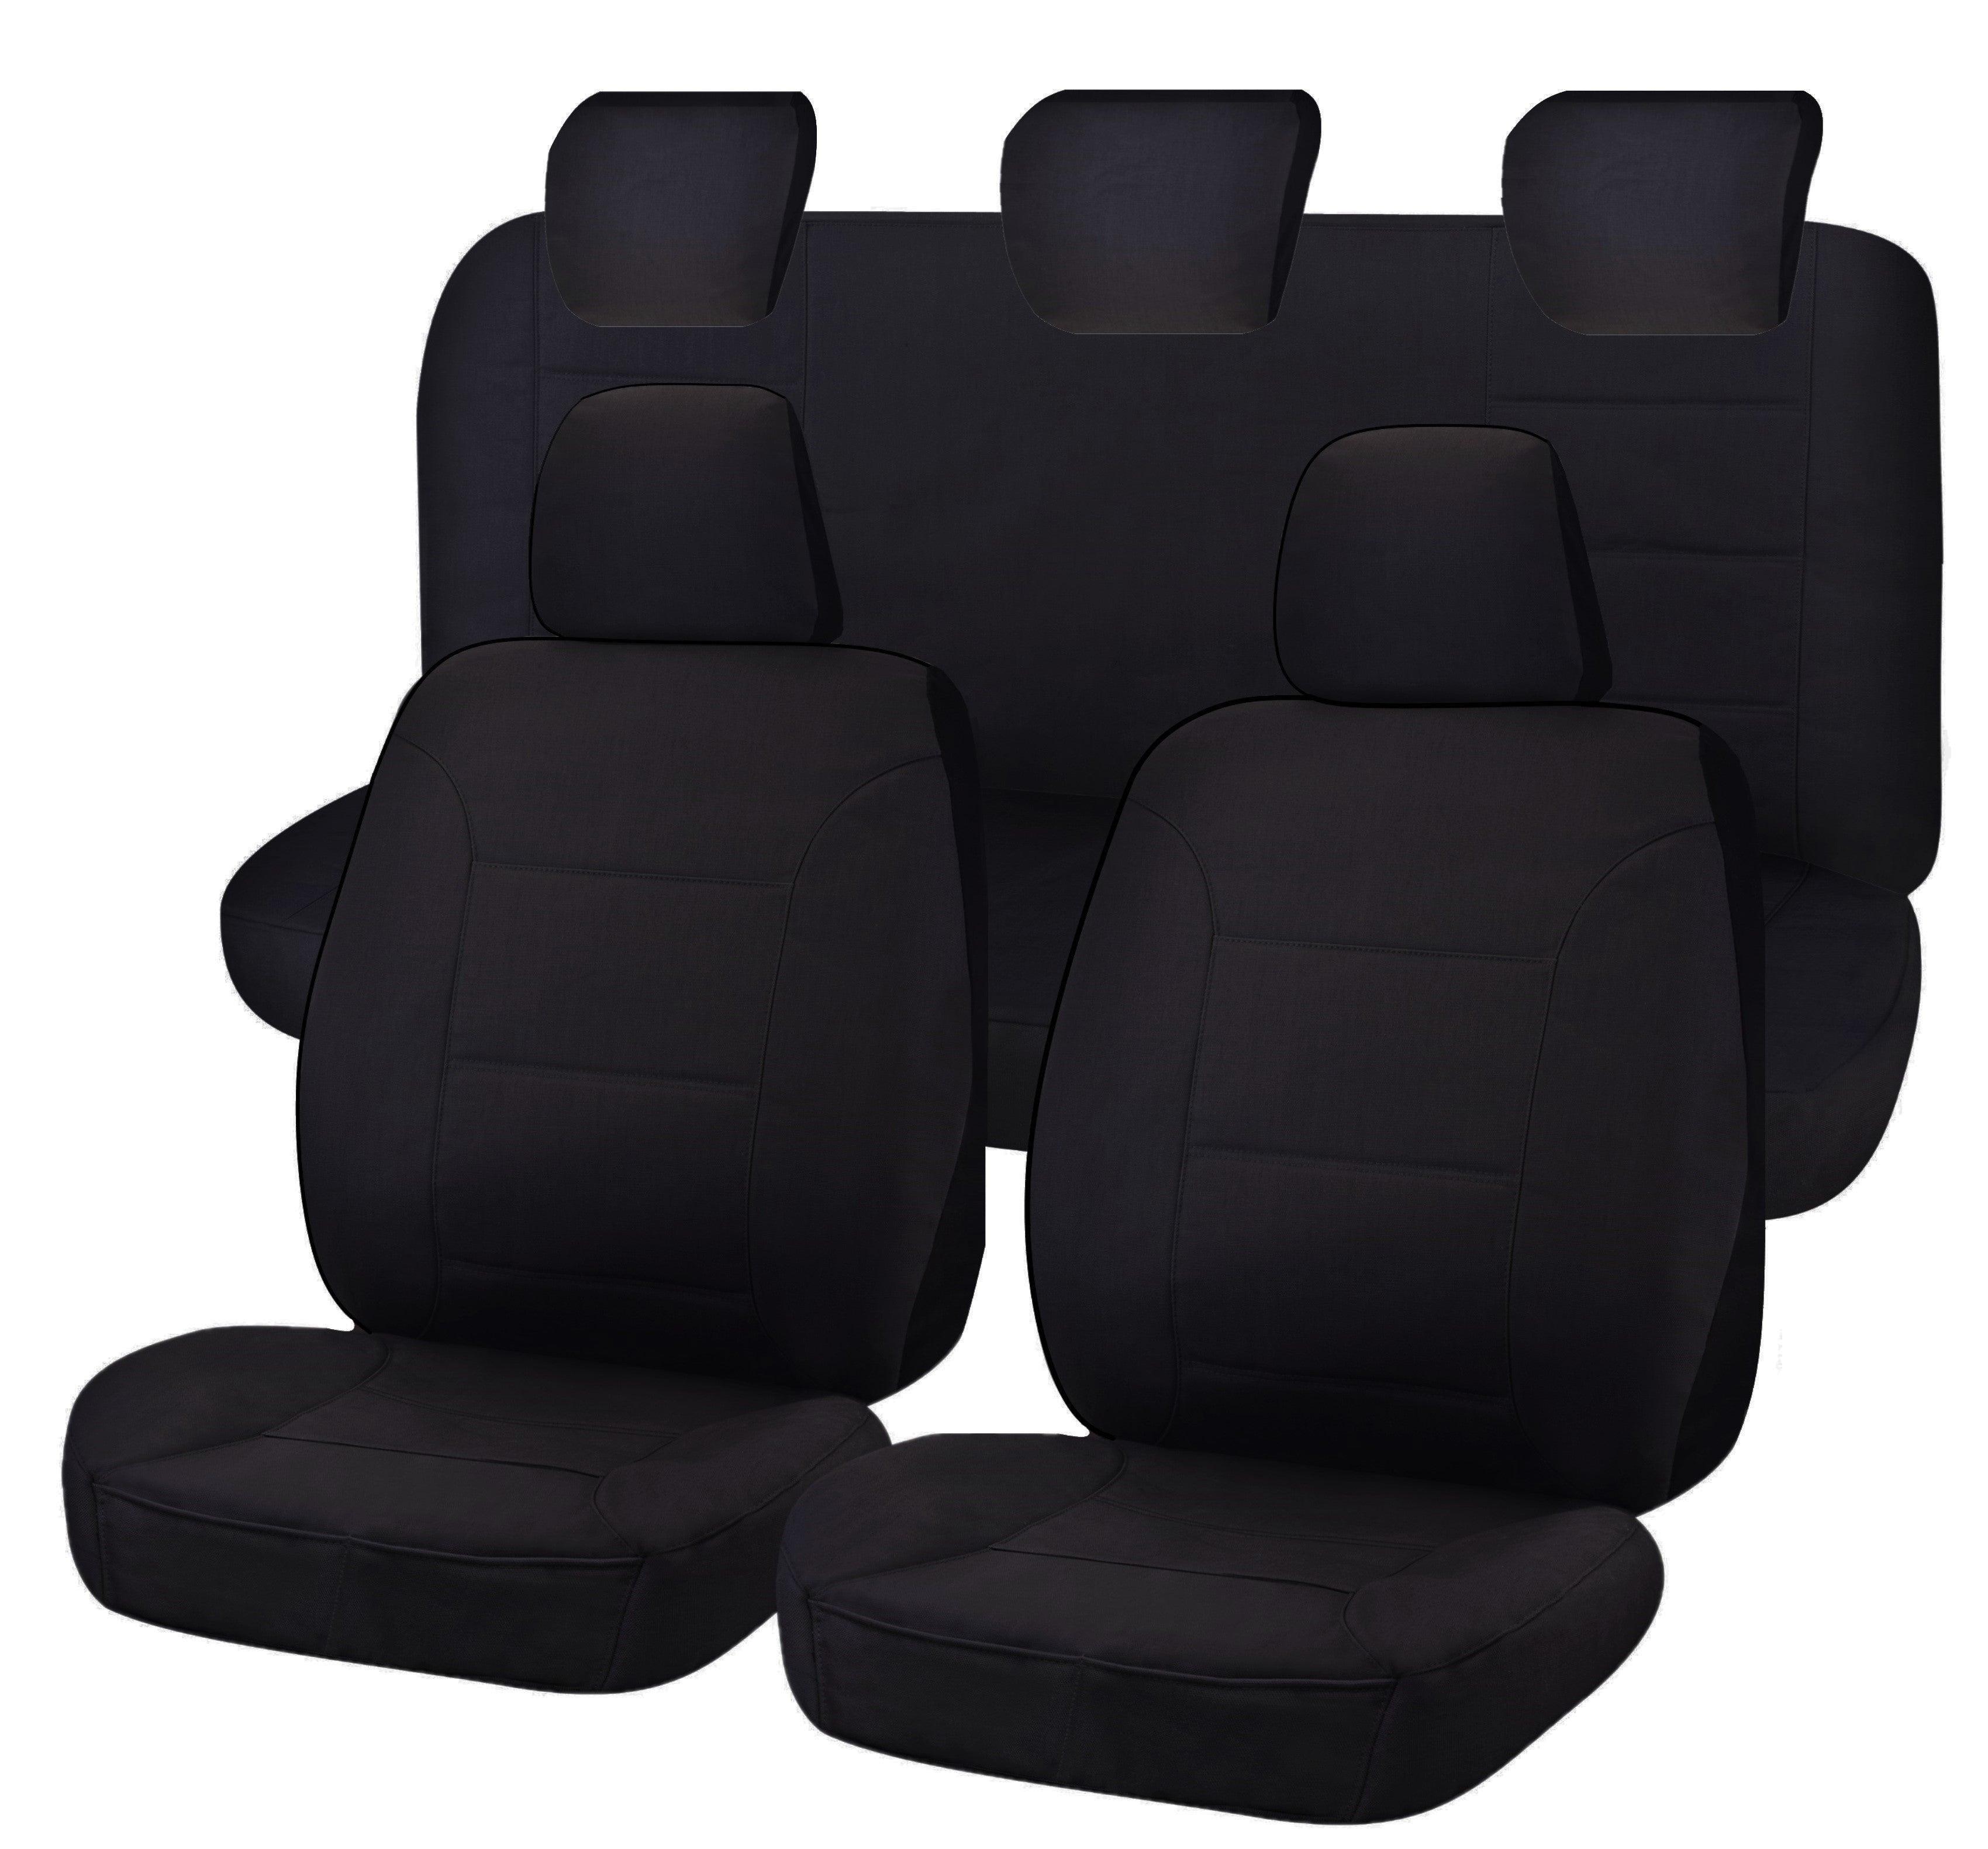 Challenger Plus Full Canvas Seat Covers - For Toyota Hiace Commuter Bus 12 Seater(02/2019-On)